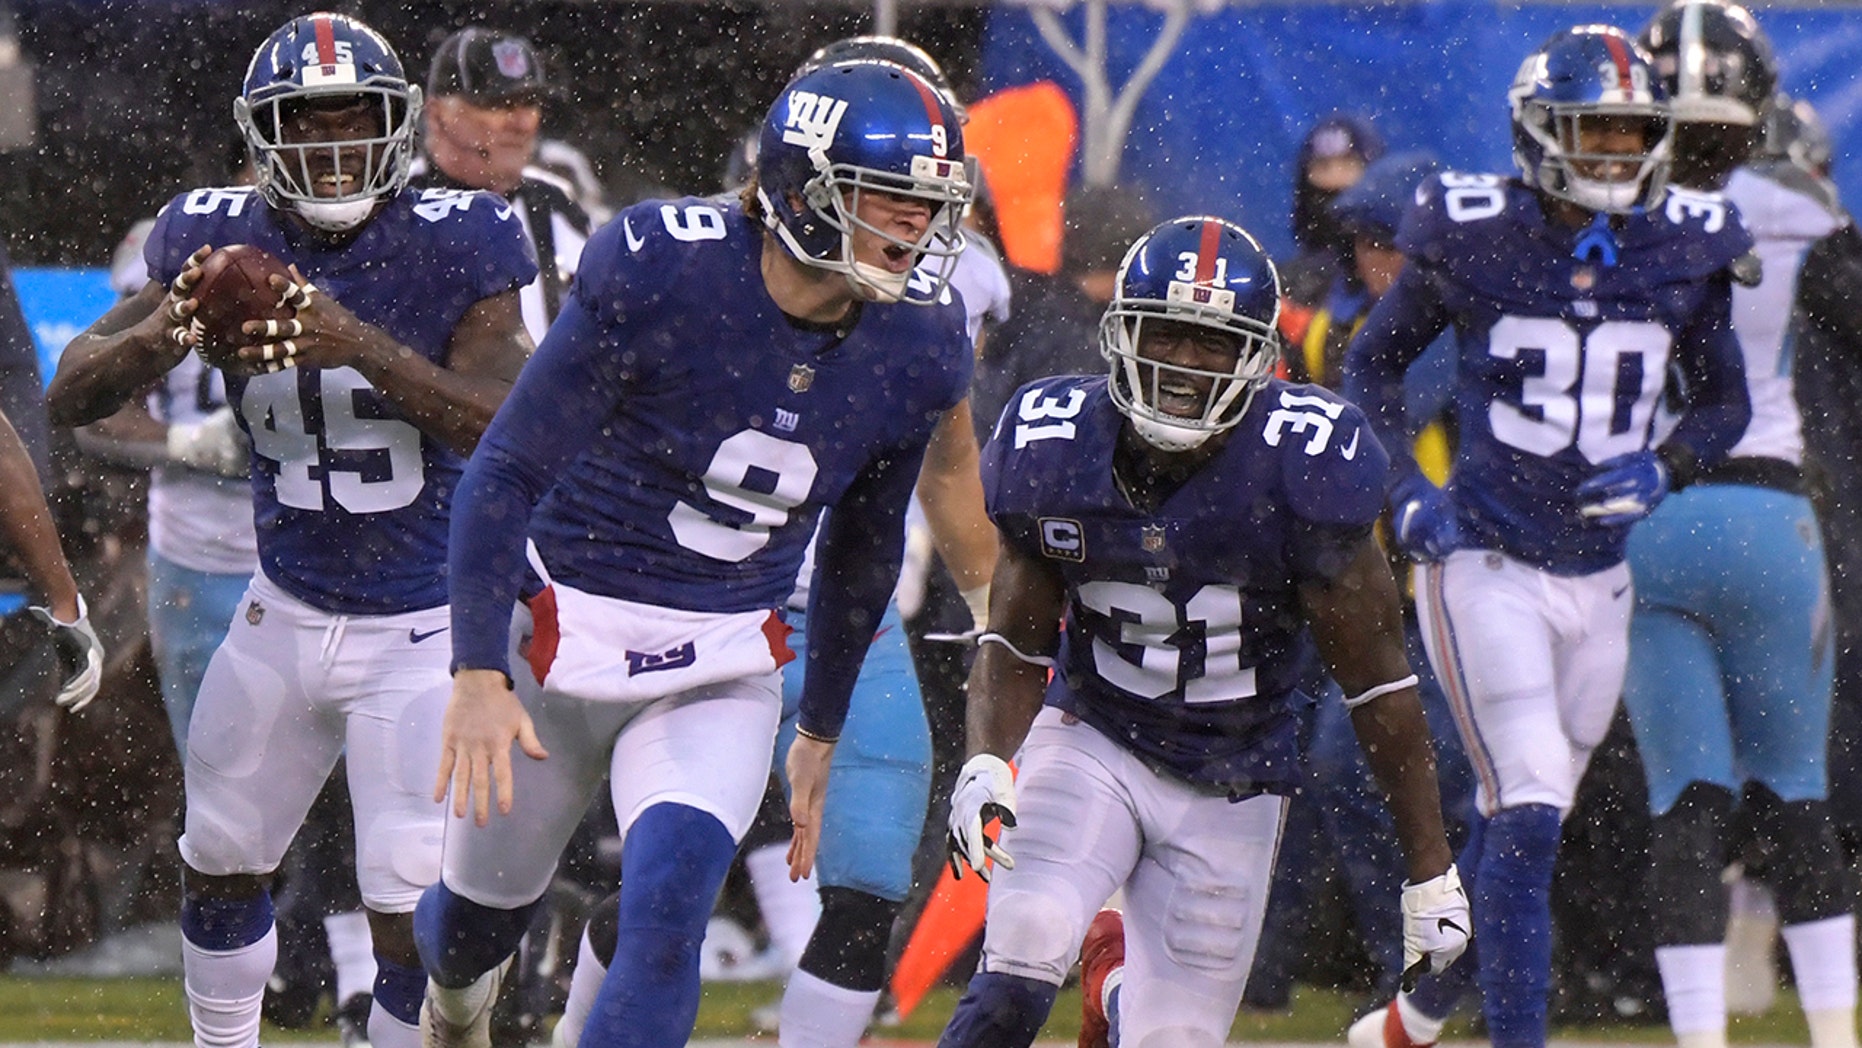 New York Giants punter Riley Dixon (9) reacts after running a fake punt for a first down against the Tennessee Titans during the first half of an NFL football game, Sunday, Dec. 16, 2018, in East Rutherford, N.J.(Associated Press)